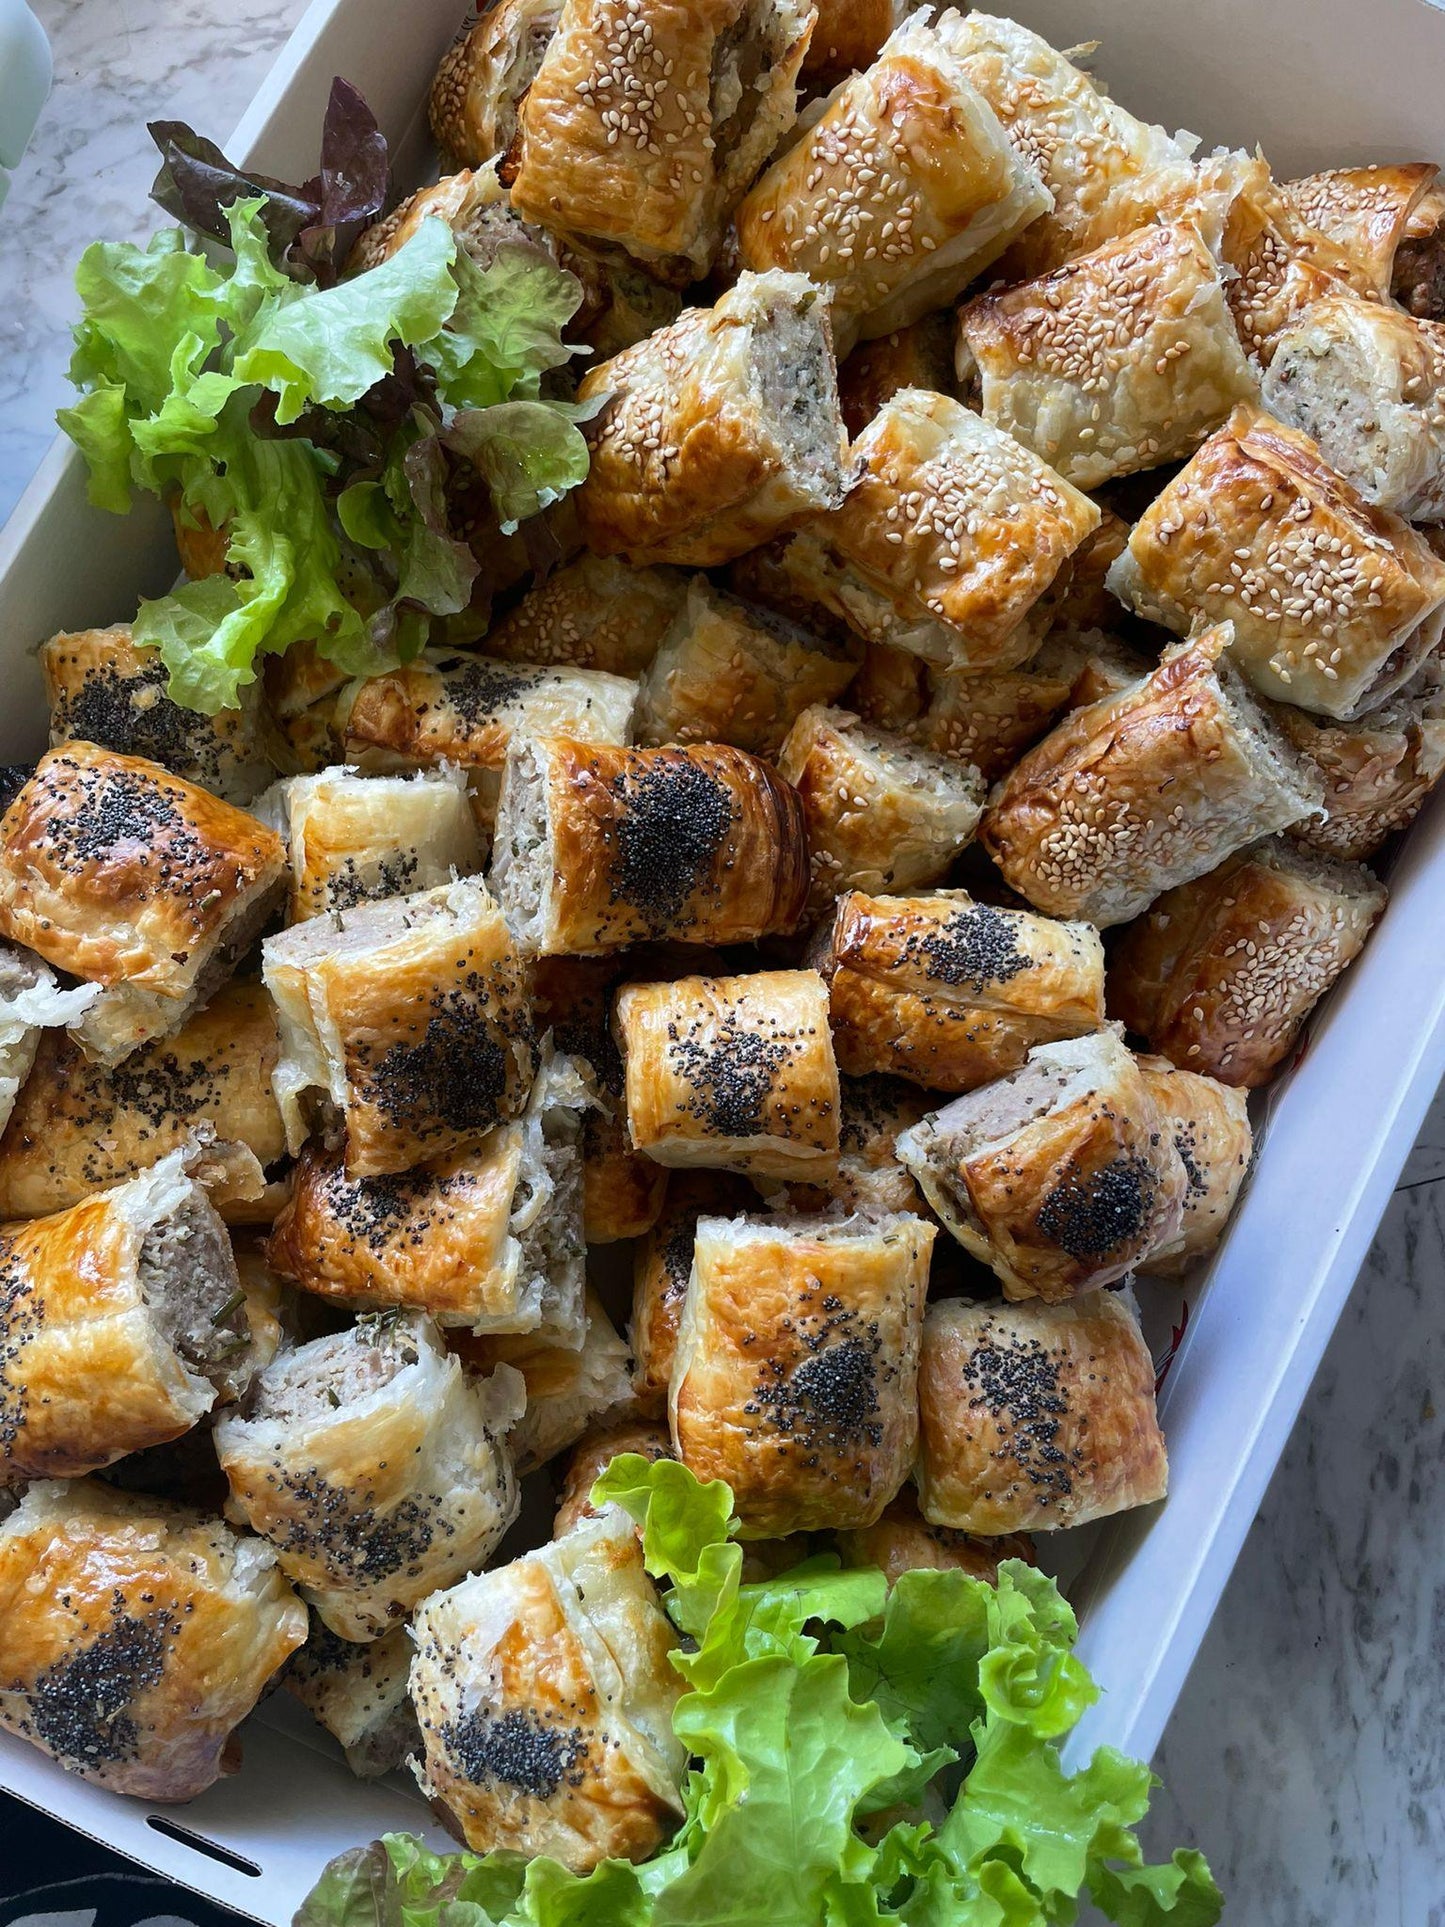 Gourmet Sausage Rolls - Sammys Catering & Co